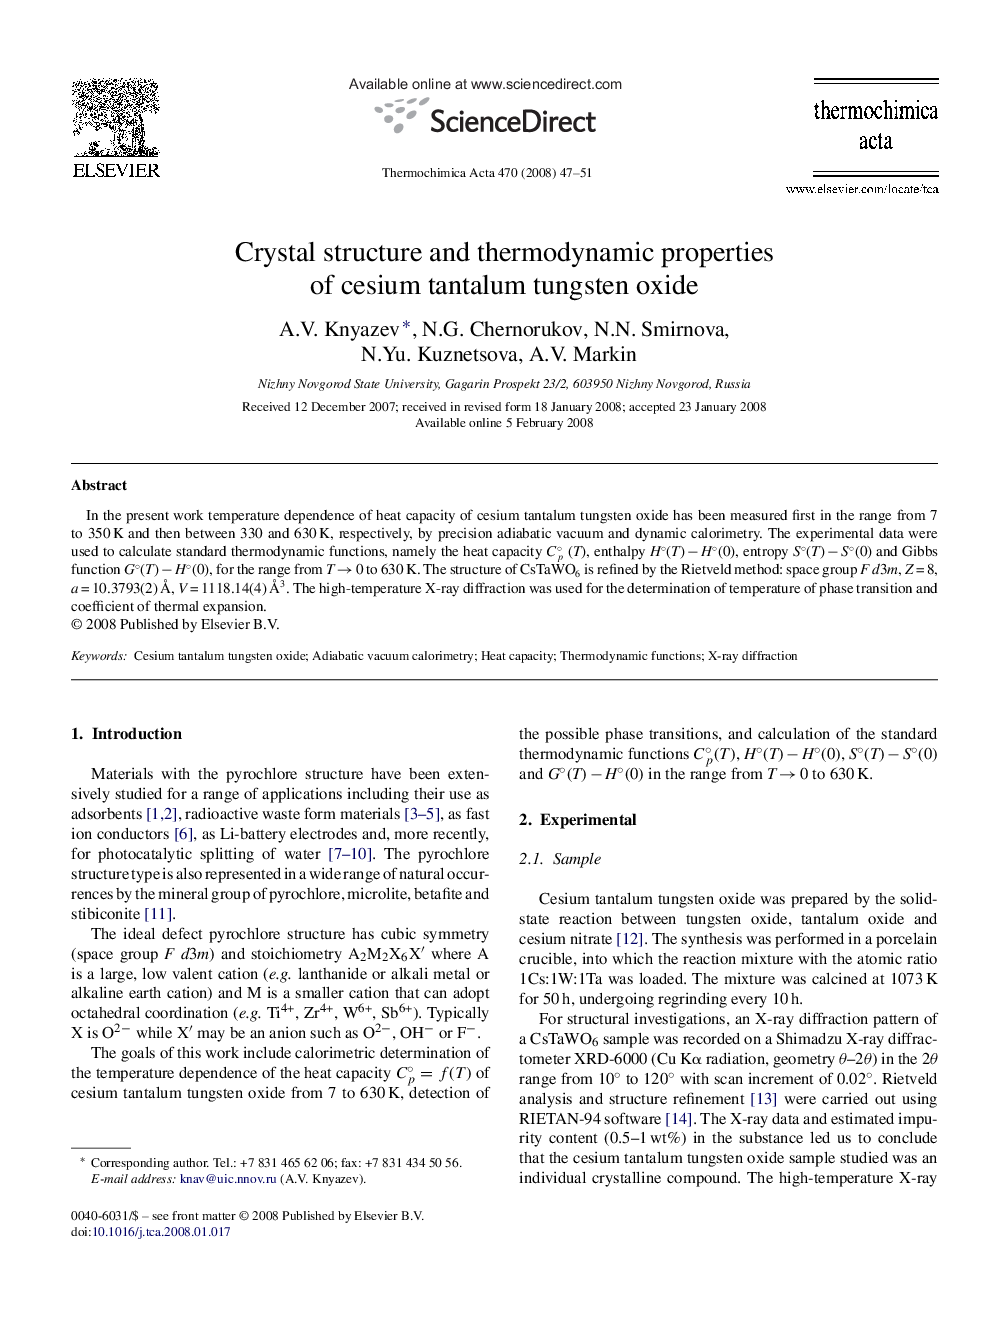 Crystal structure and thermodynamic properties of cesium tantalum tungsten oxide